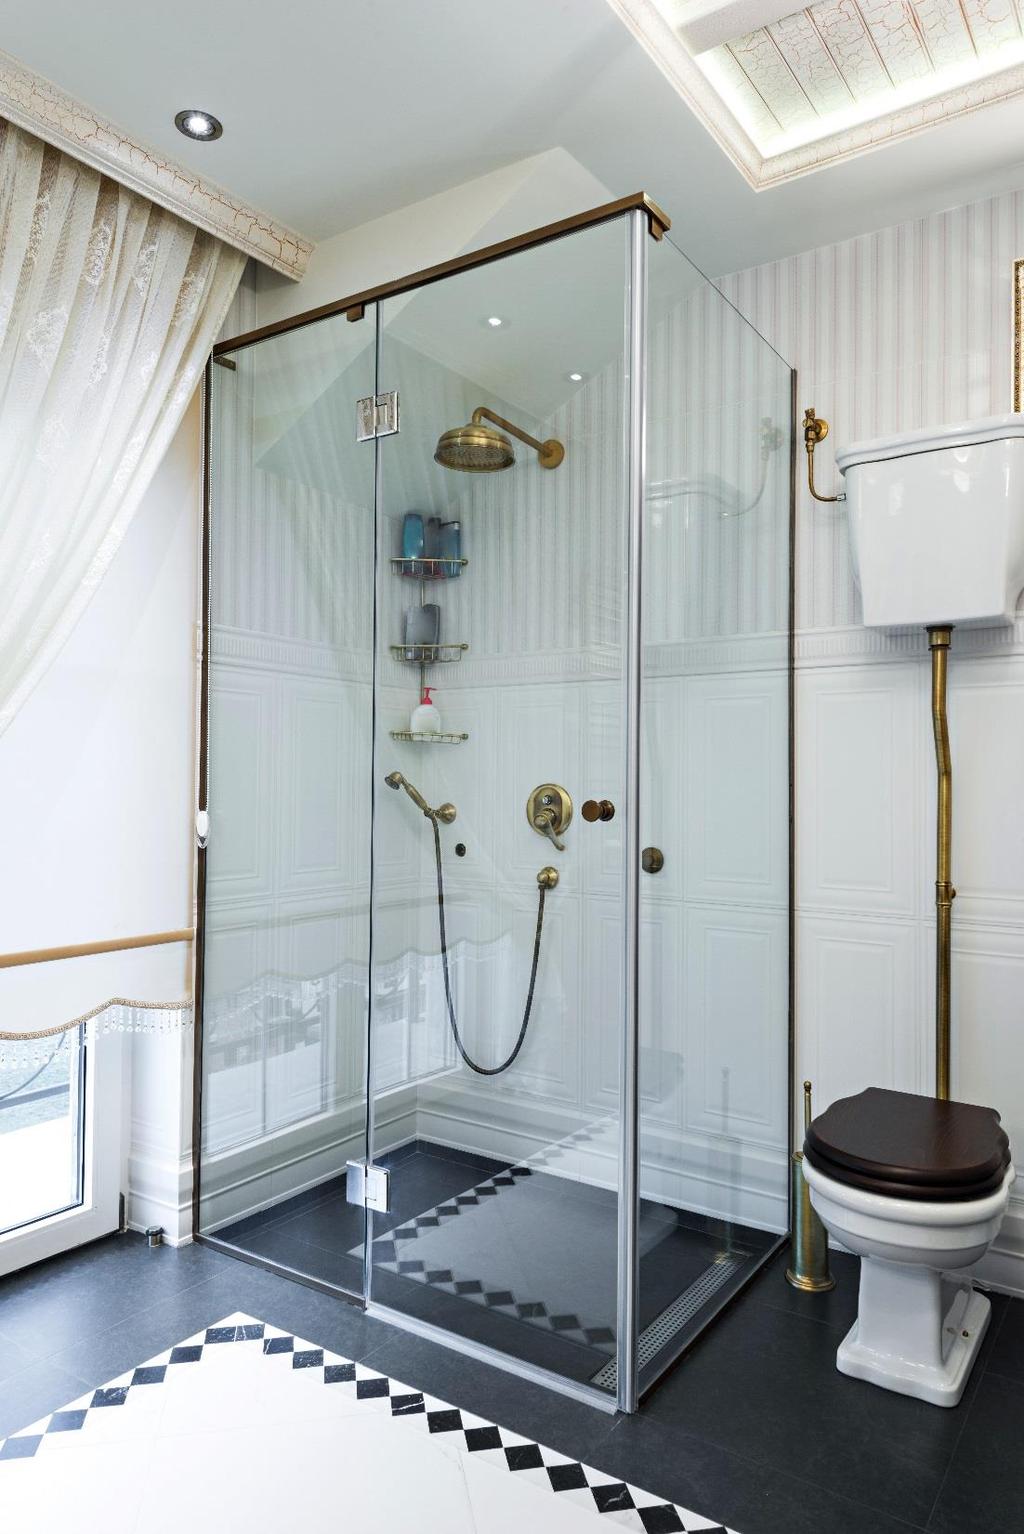 SECTION O2 SHOWER ENCLOSURES The shower is your showcase, your jewel. The best way to allow your centerpiece to shine is through simplicity. Start big, and work your way down.